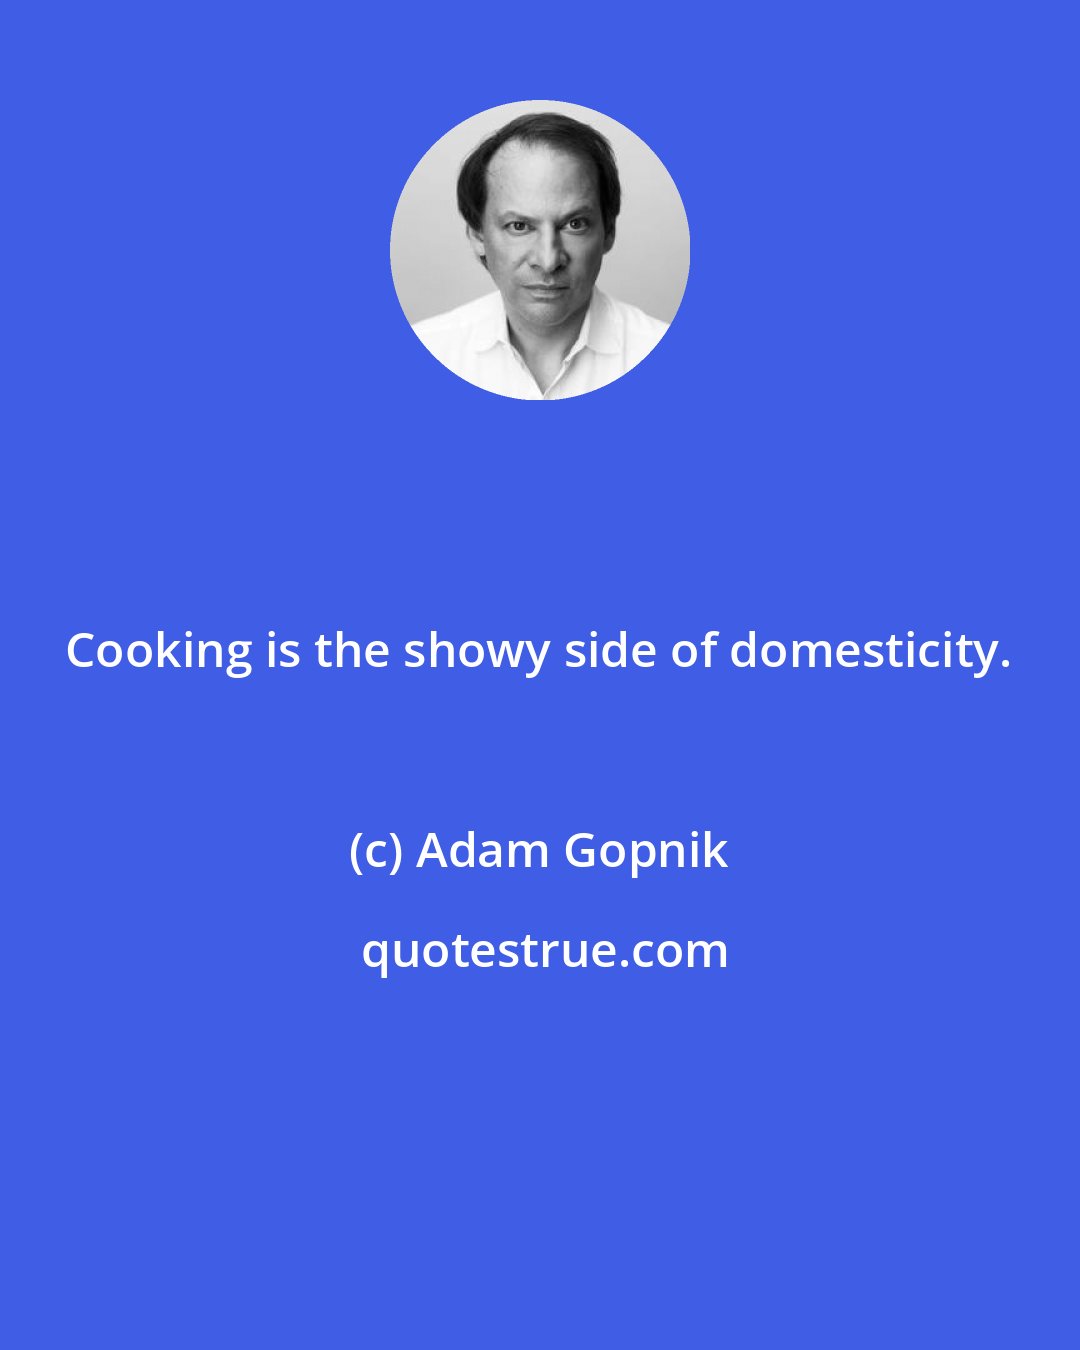 Adam Gopnik: Cooking is the showy side of domesticity.